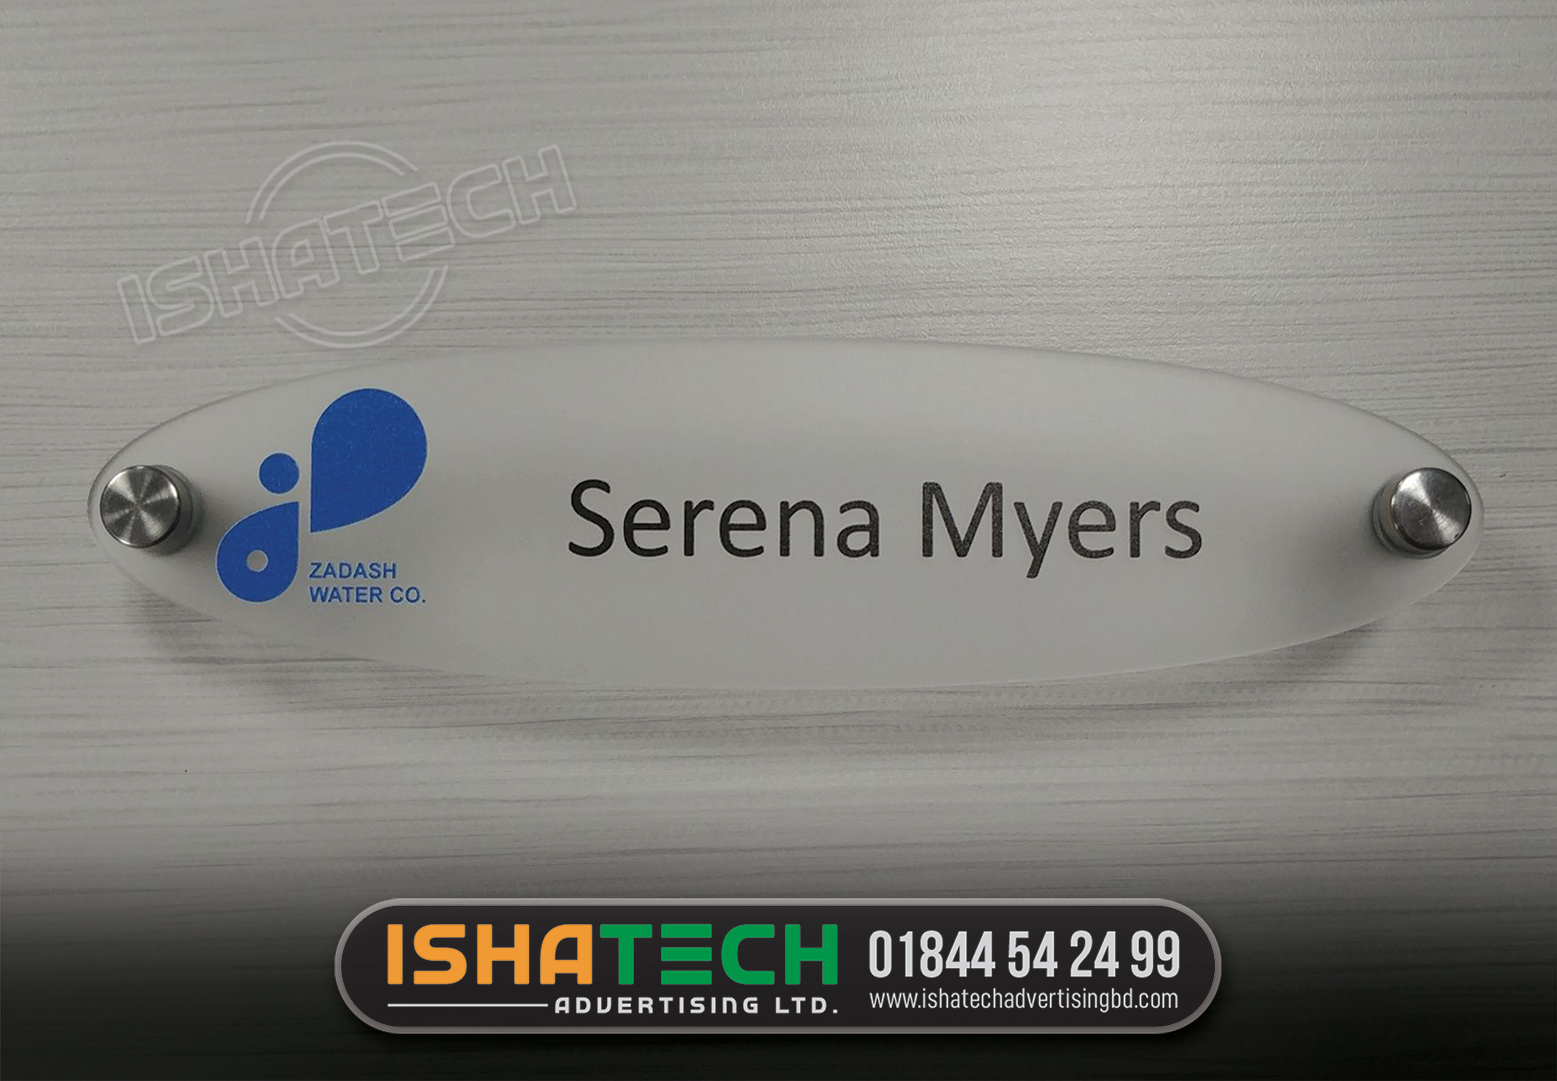 SERENA MYERS GLASS NAME PLATE MAKING BD, House Glass Nameplate Manufacturer